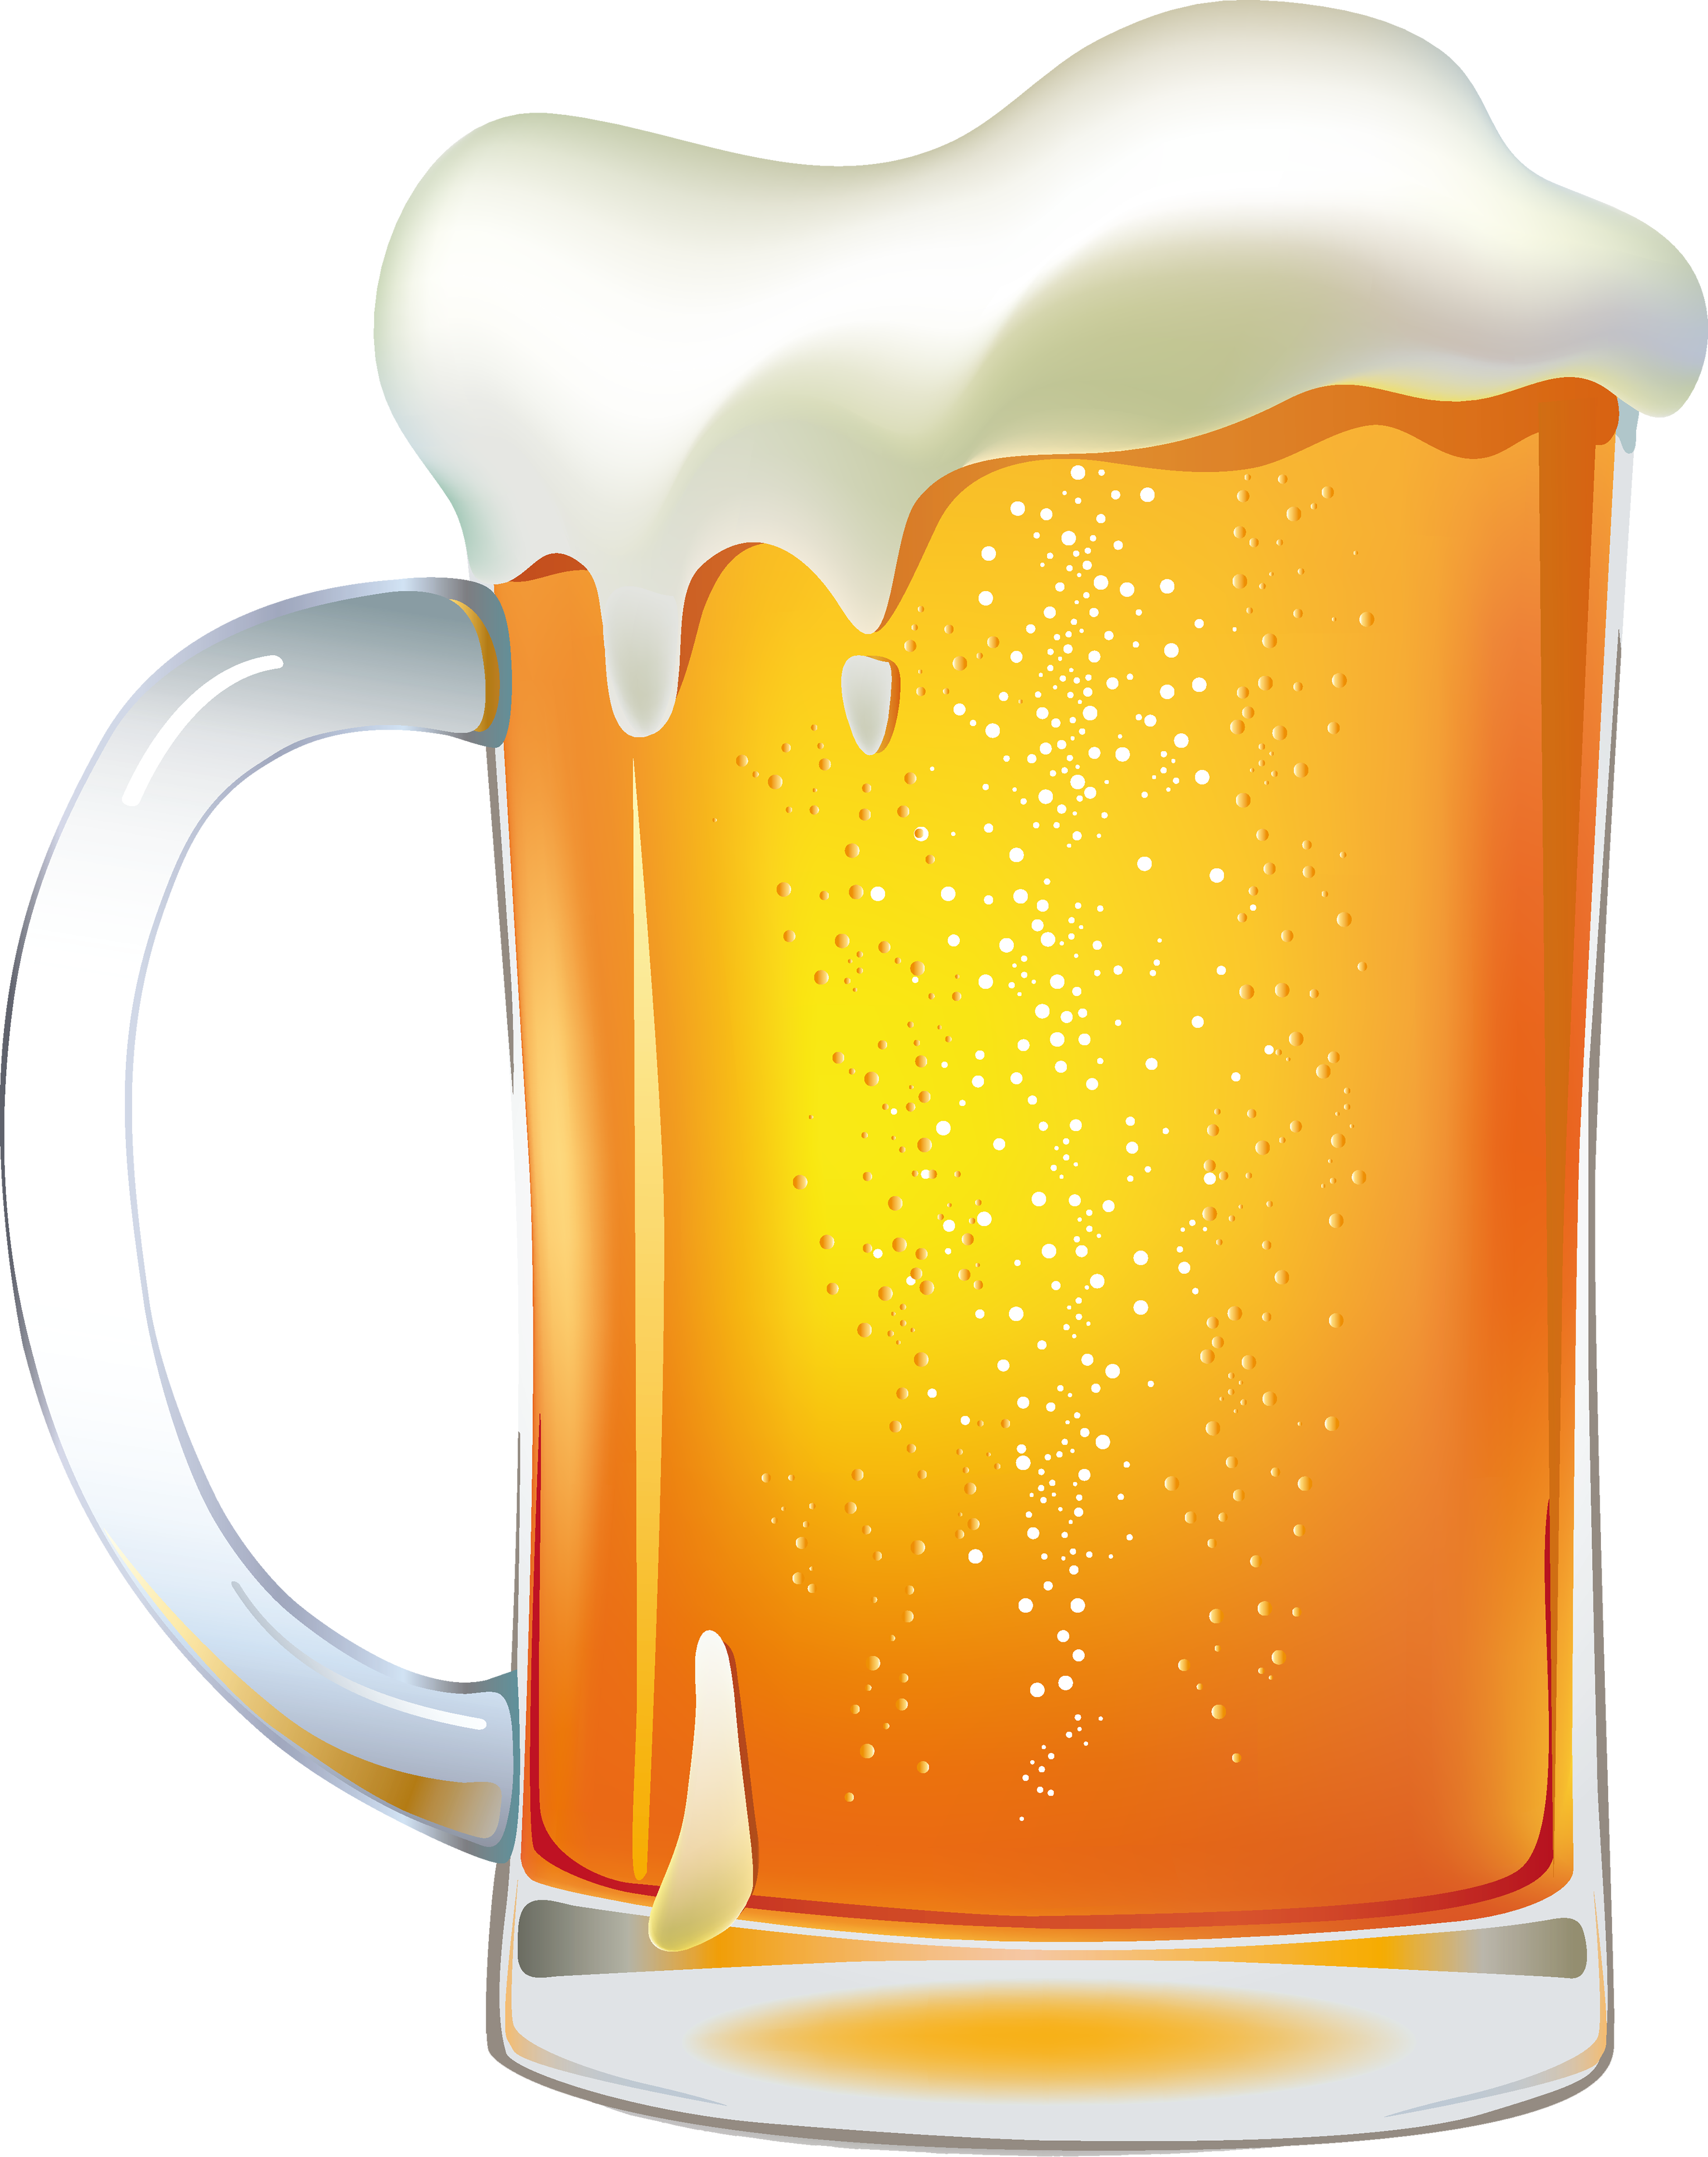 Beer clip art free free clipart images 3